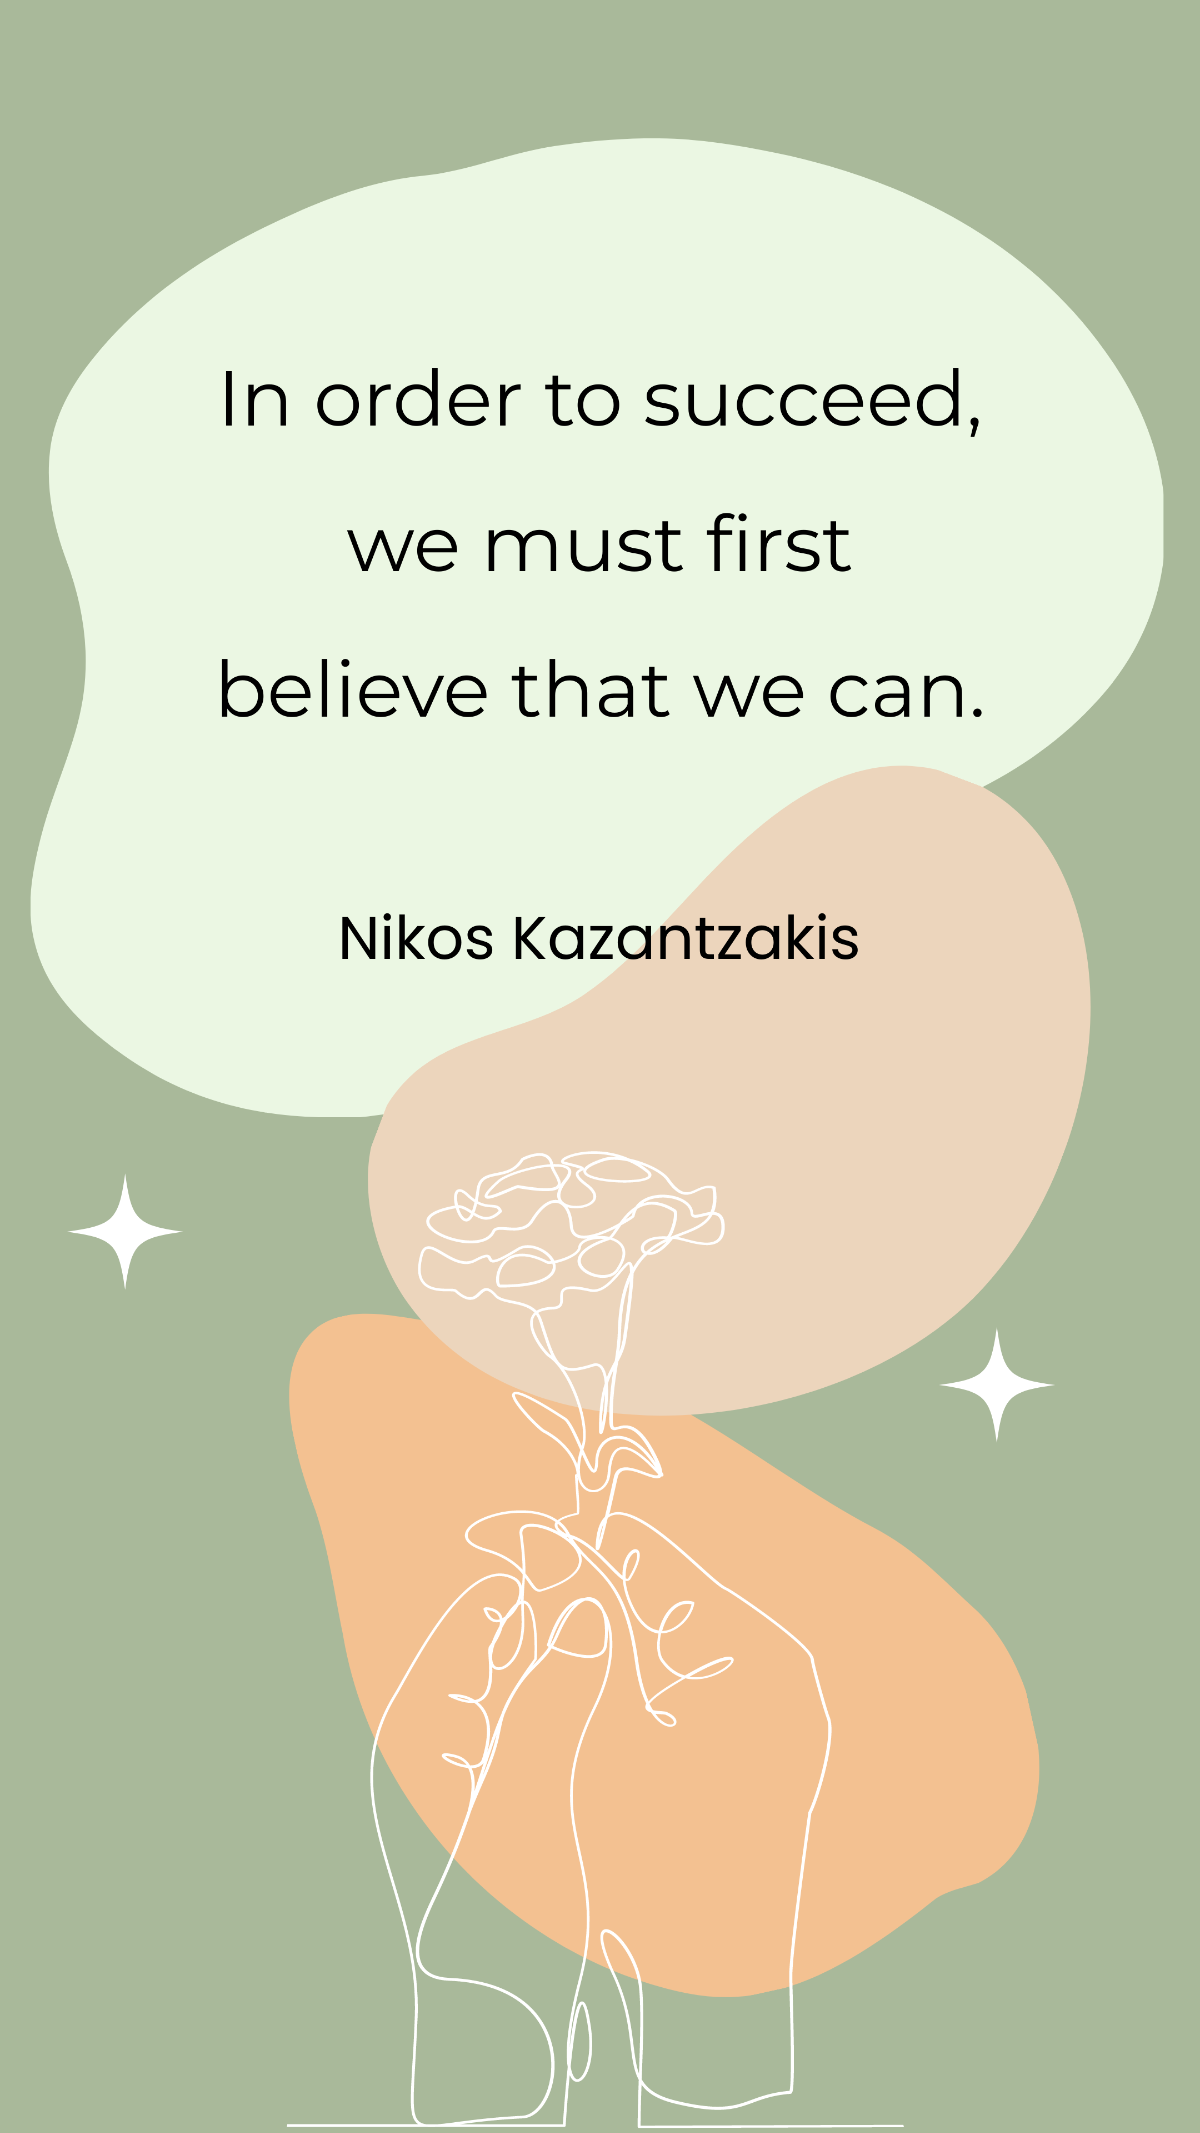 Nikos Kazantzakis - In order to succeed, we must first believe that we can. Template